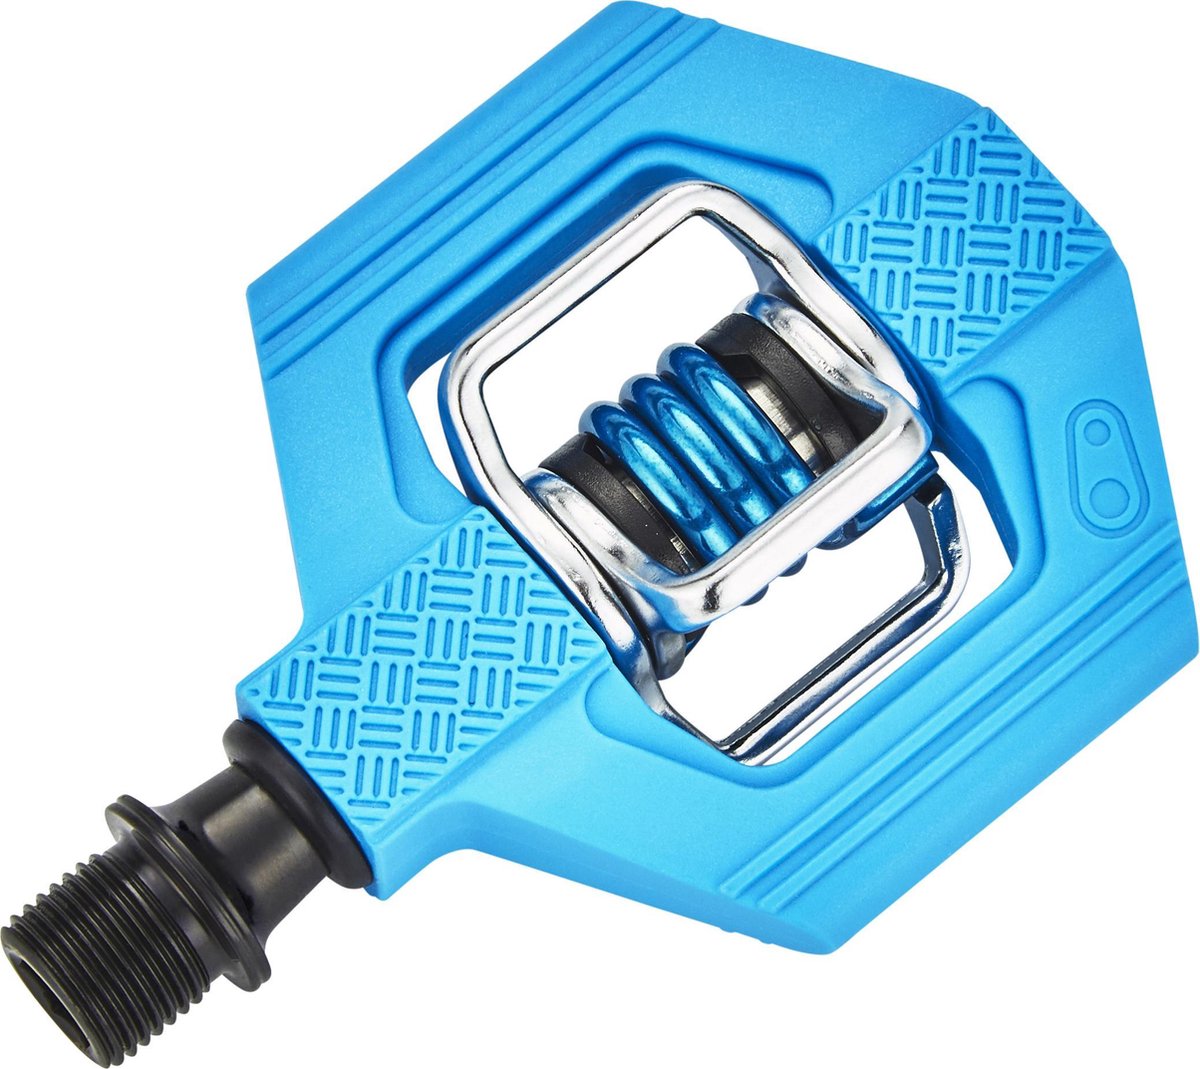 Crankbrothers Candy 1 Pedalen, blue/blue